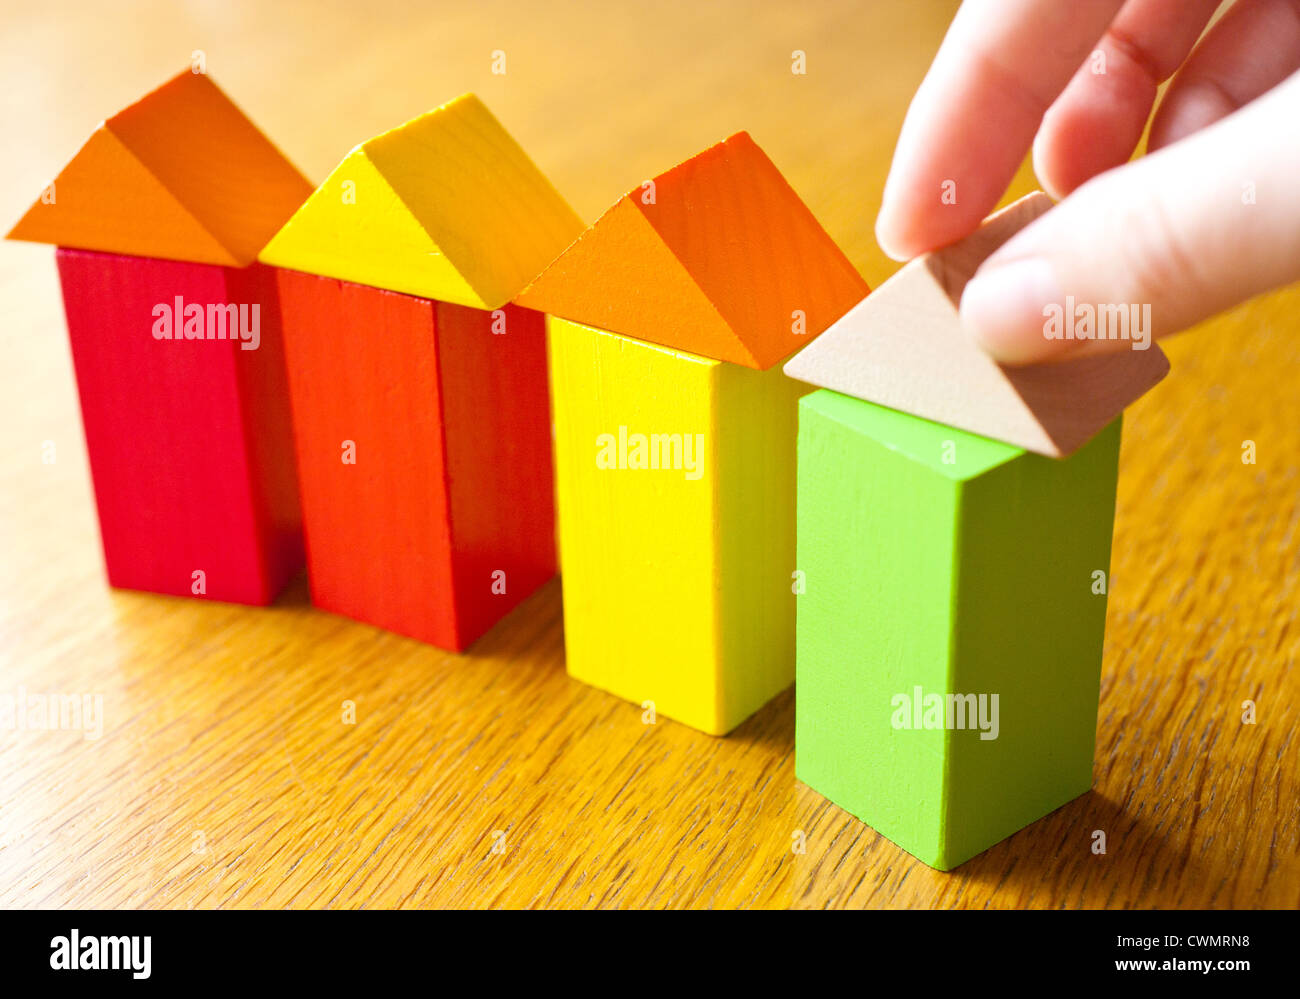 Family house made of wooden blocks - various heating systems Stock Photo